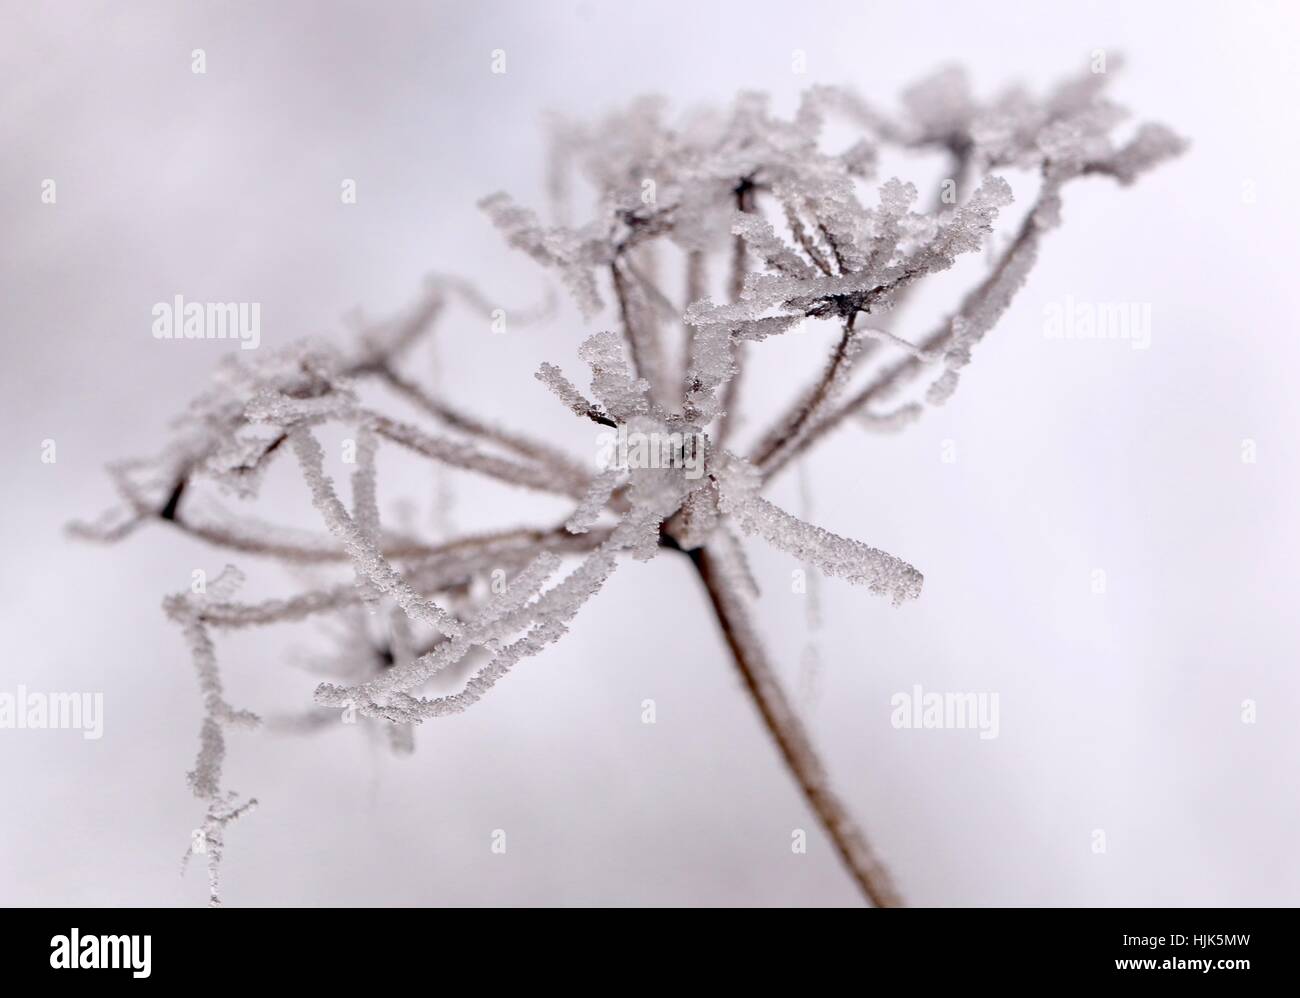 Macro image of a Frozen Cow Parsely Seed Head shot on a foggy wintery day in January Shepperton England U.K. Stock Photo